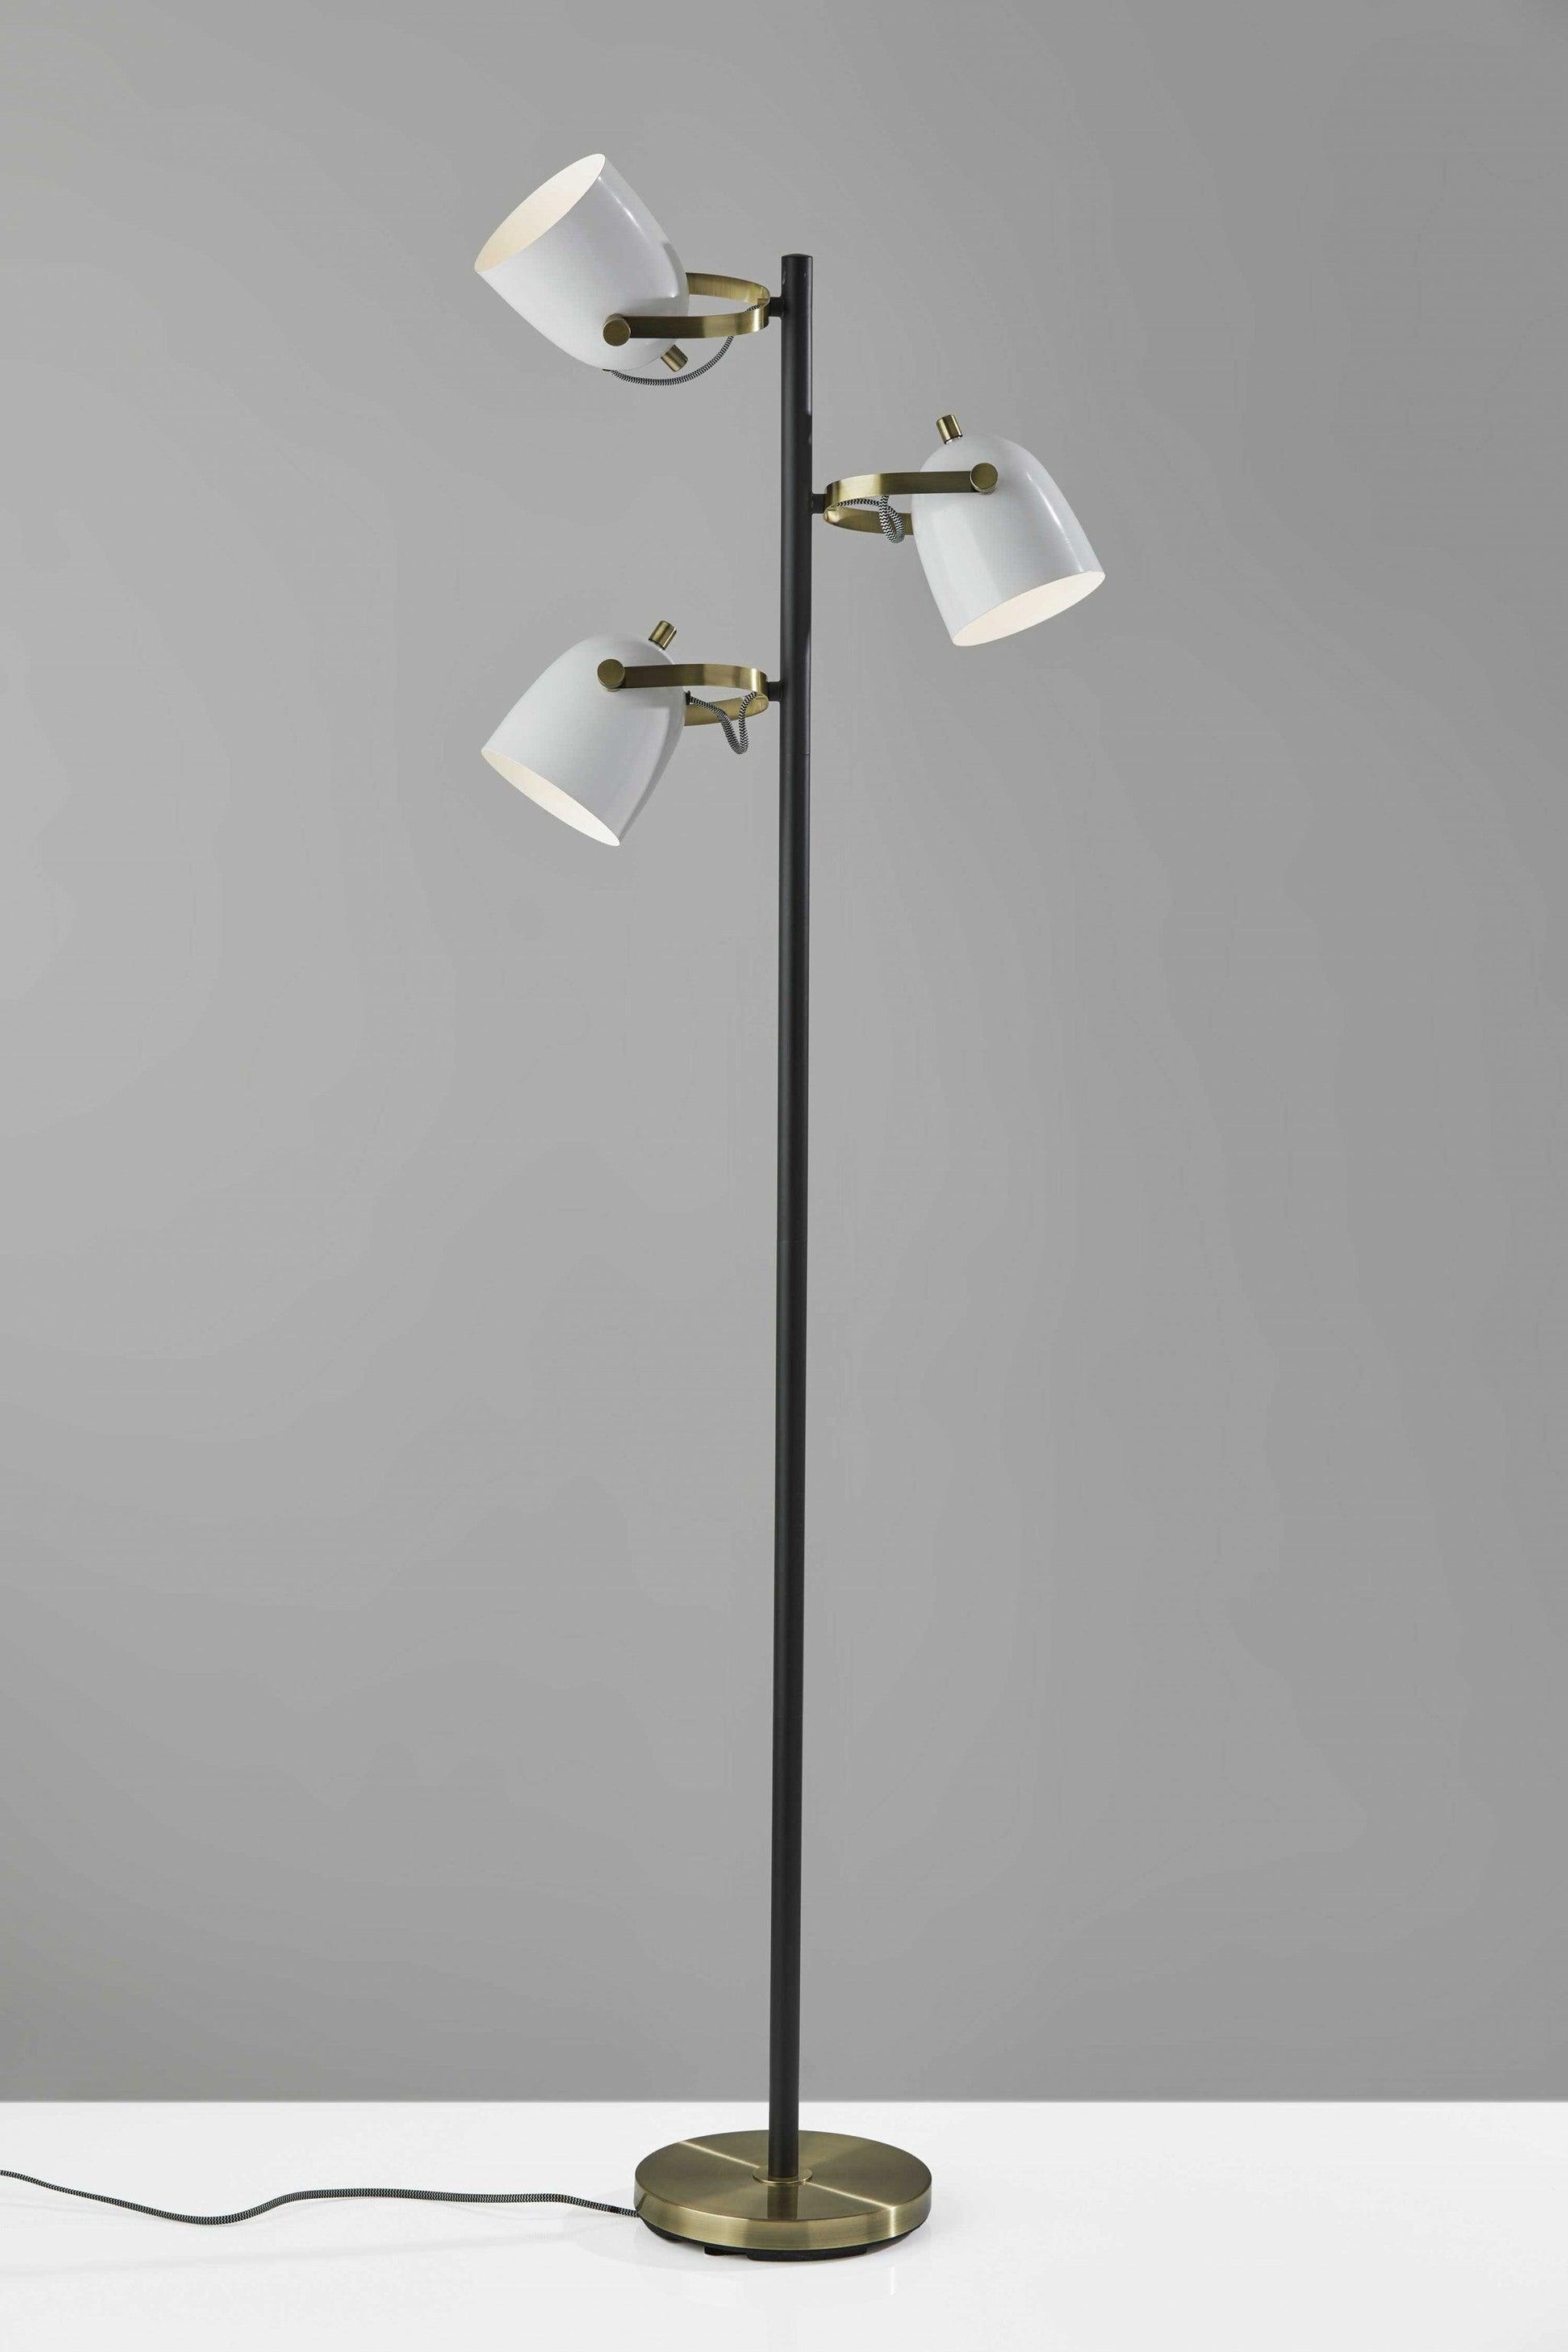 Three Light Floor Lamp with Adjustable White Metal Shades - AFS